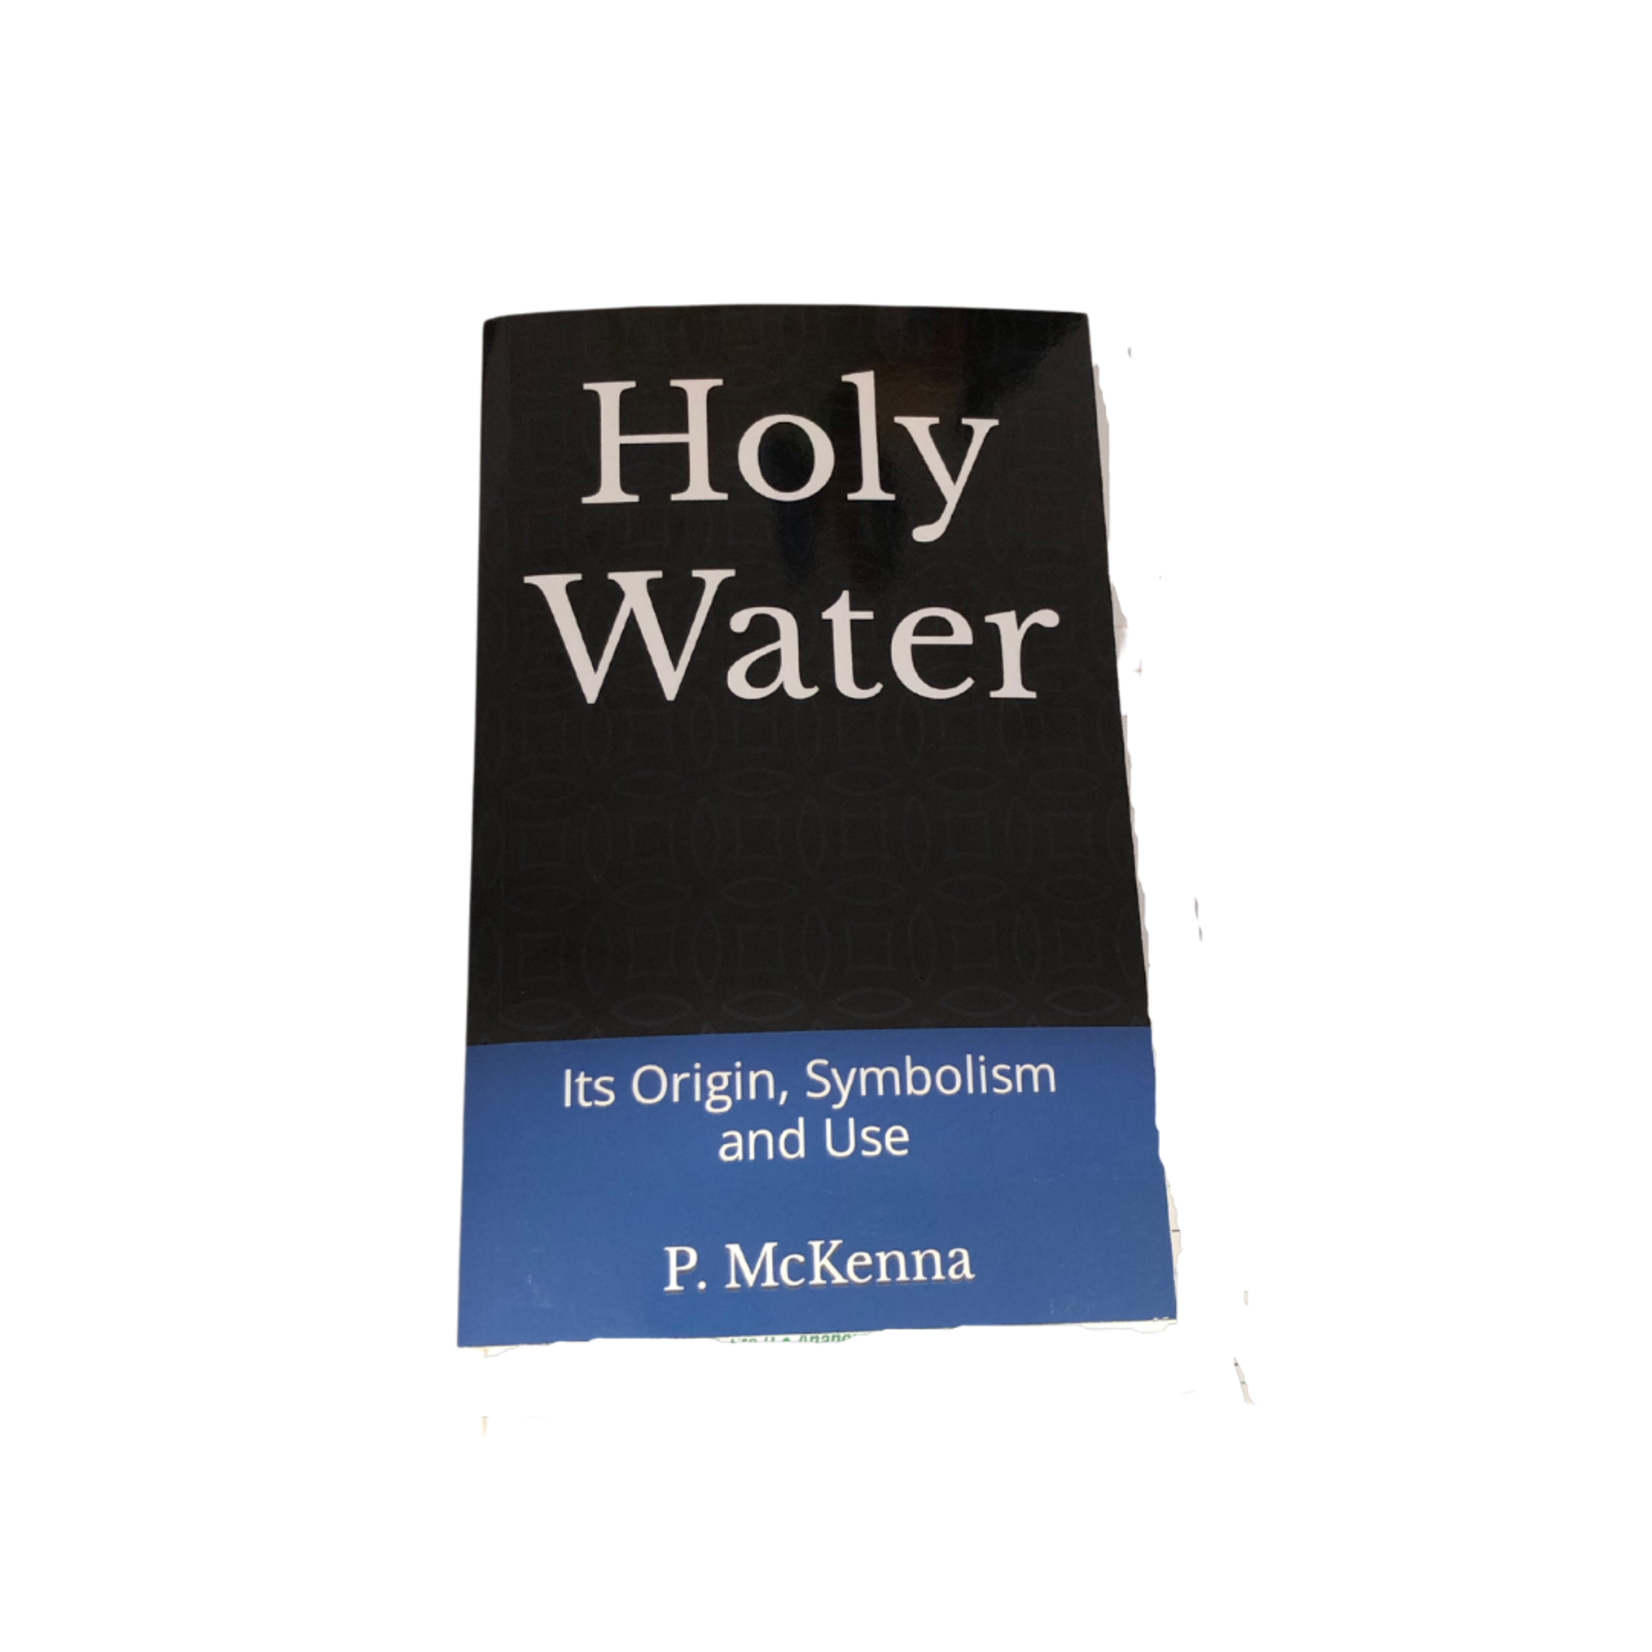 Holy Water-Its Origin, Symbolism and Use